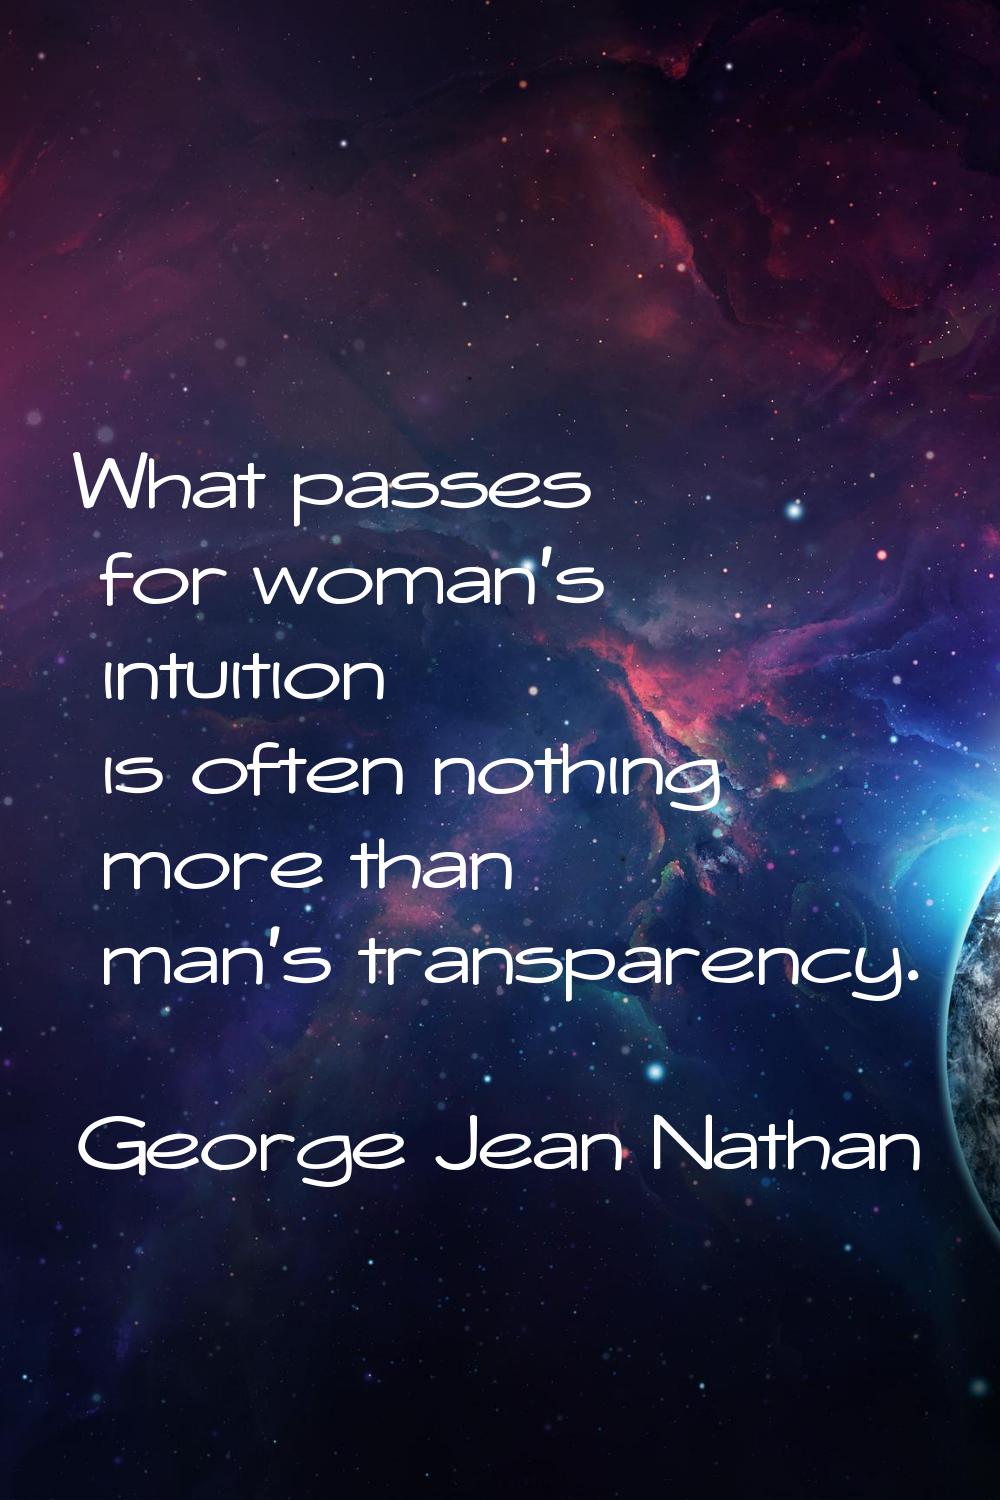 What passes for woman's intuition is often nothing more than man's transparency.